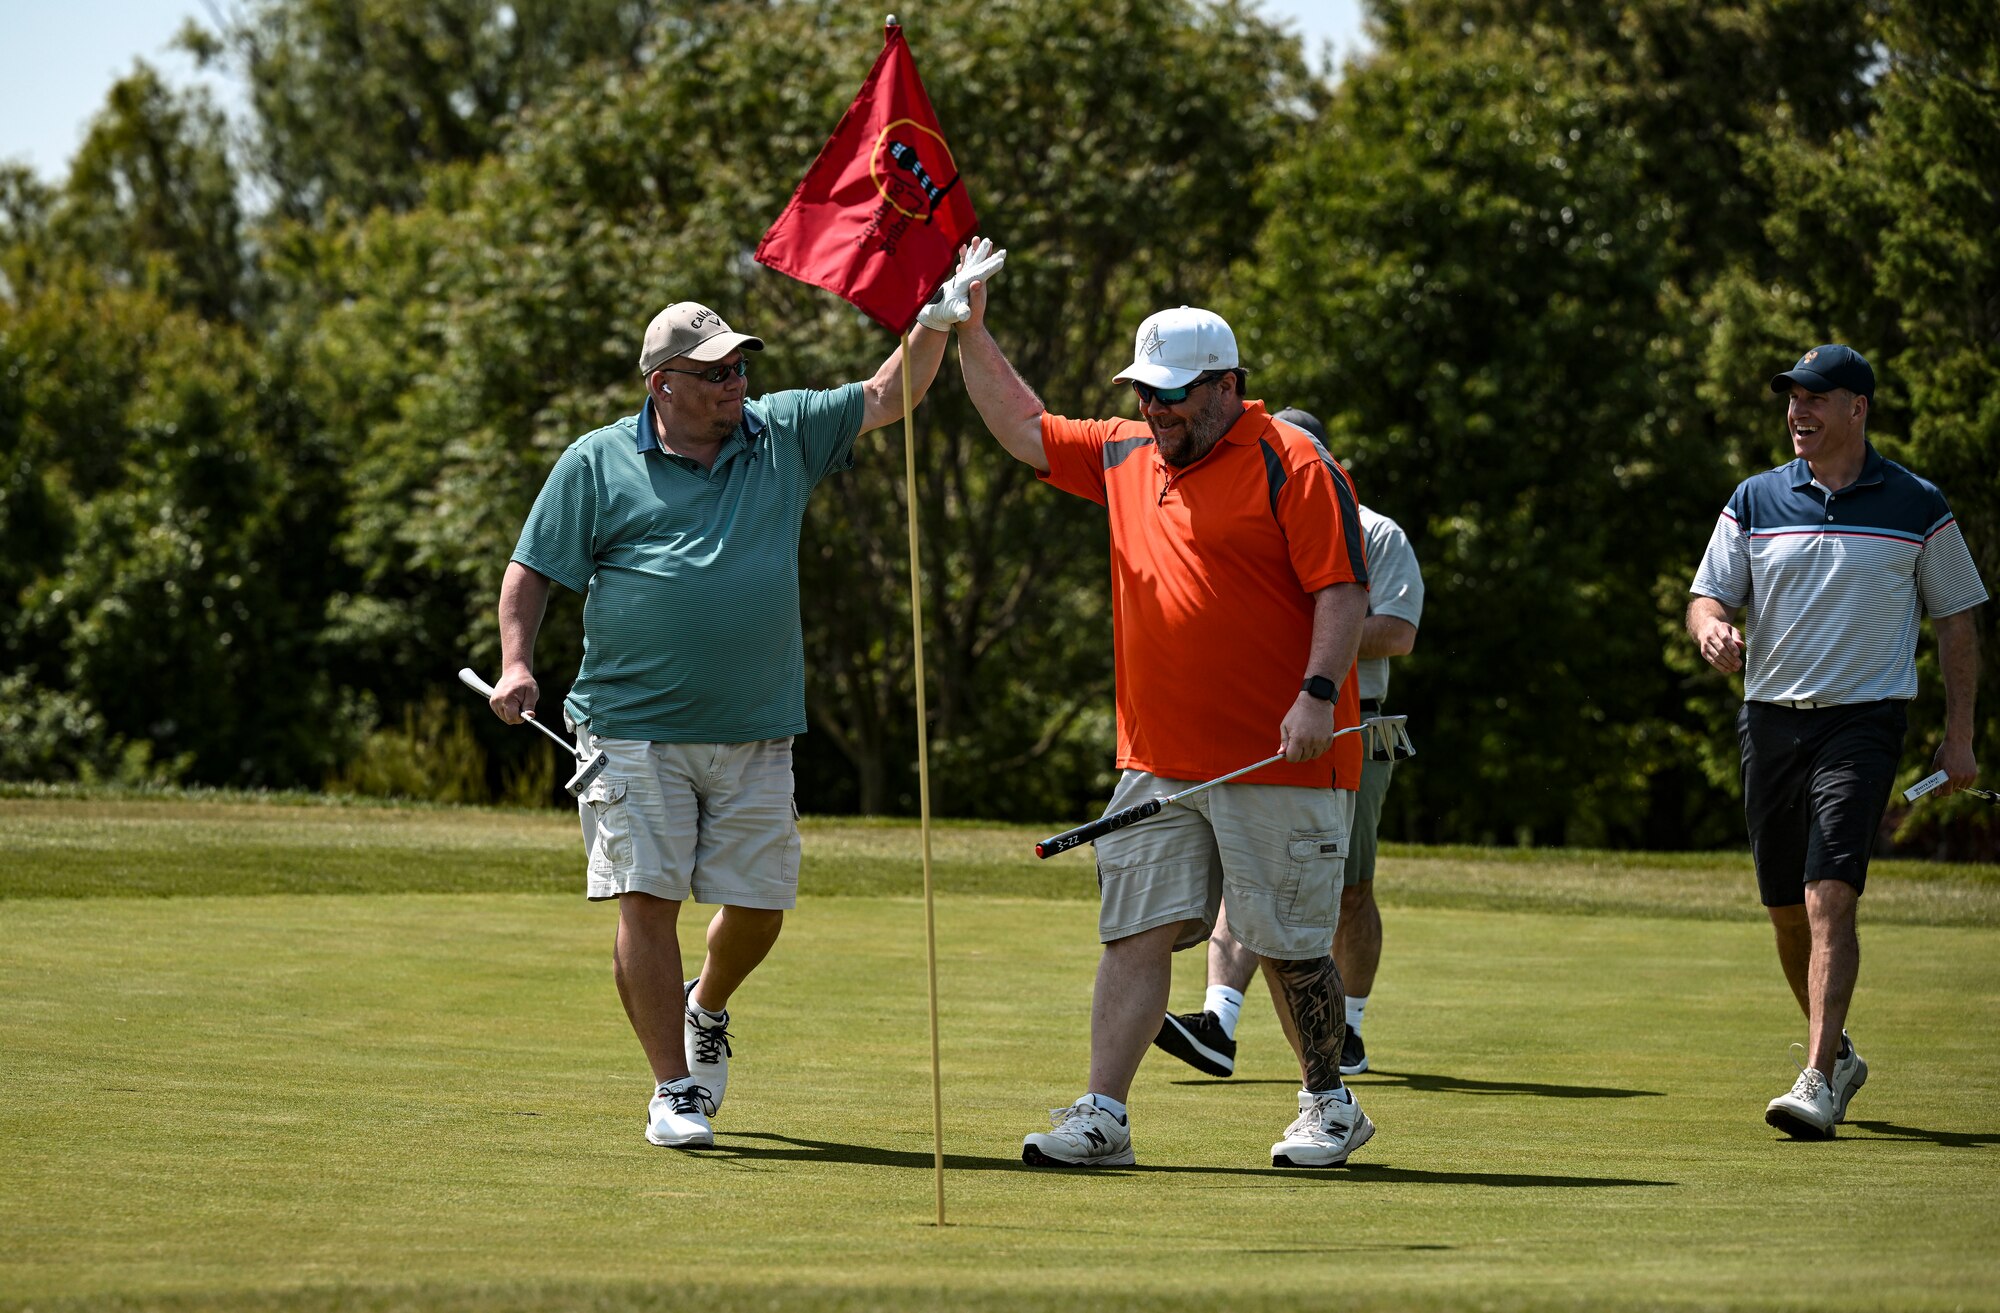 A group of participants celebrate during the Bluesuiters Golf Tournament at Jonathan’s Landing Golf Course in Magnolia, Delaware, May 11, 2023. The tournament sponsors Dover Air Force Base Airmen twice a year, matching them with local Chamber of Commerce members. The tournament provided Airmen an opportunity to engage in team-building activities and network. (U.S. Air Force photo by Staff Sgt. Marco A. Gomez)